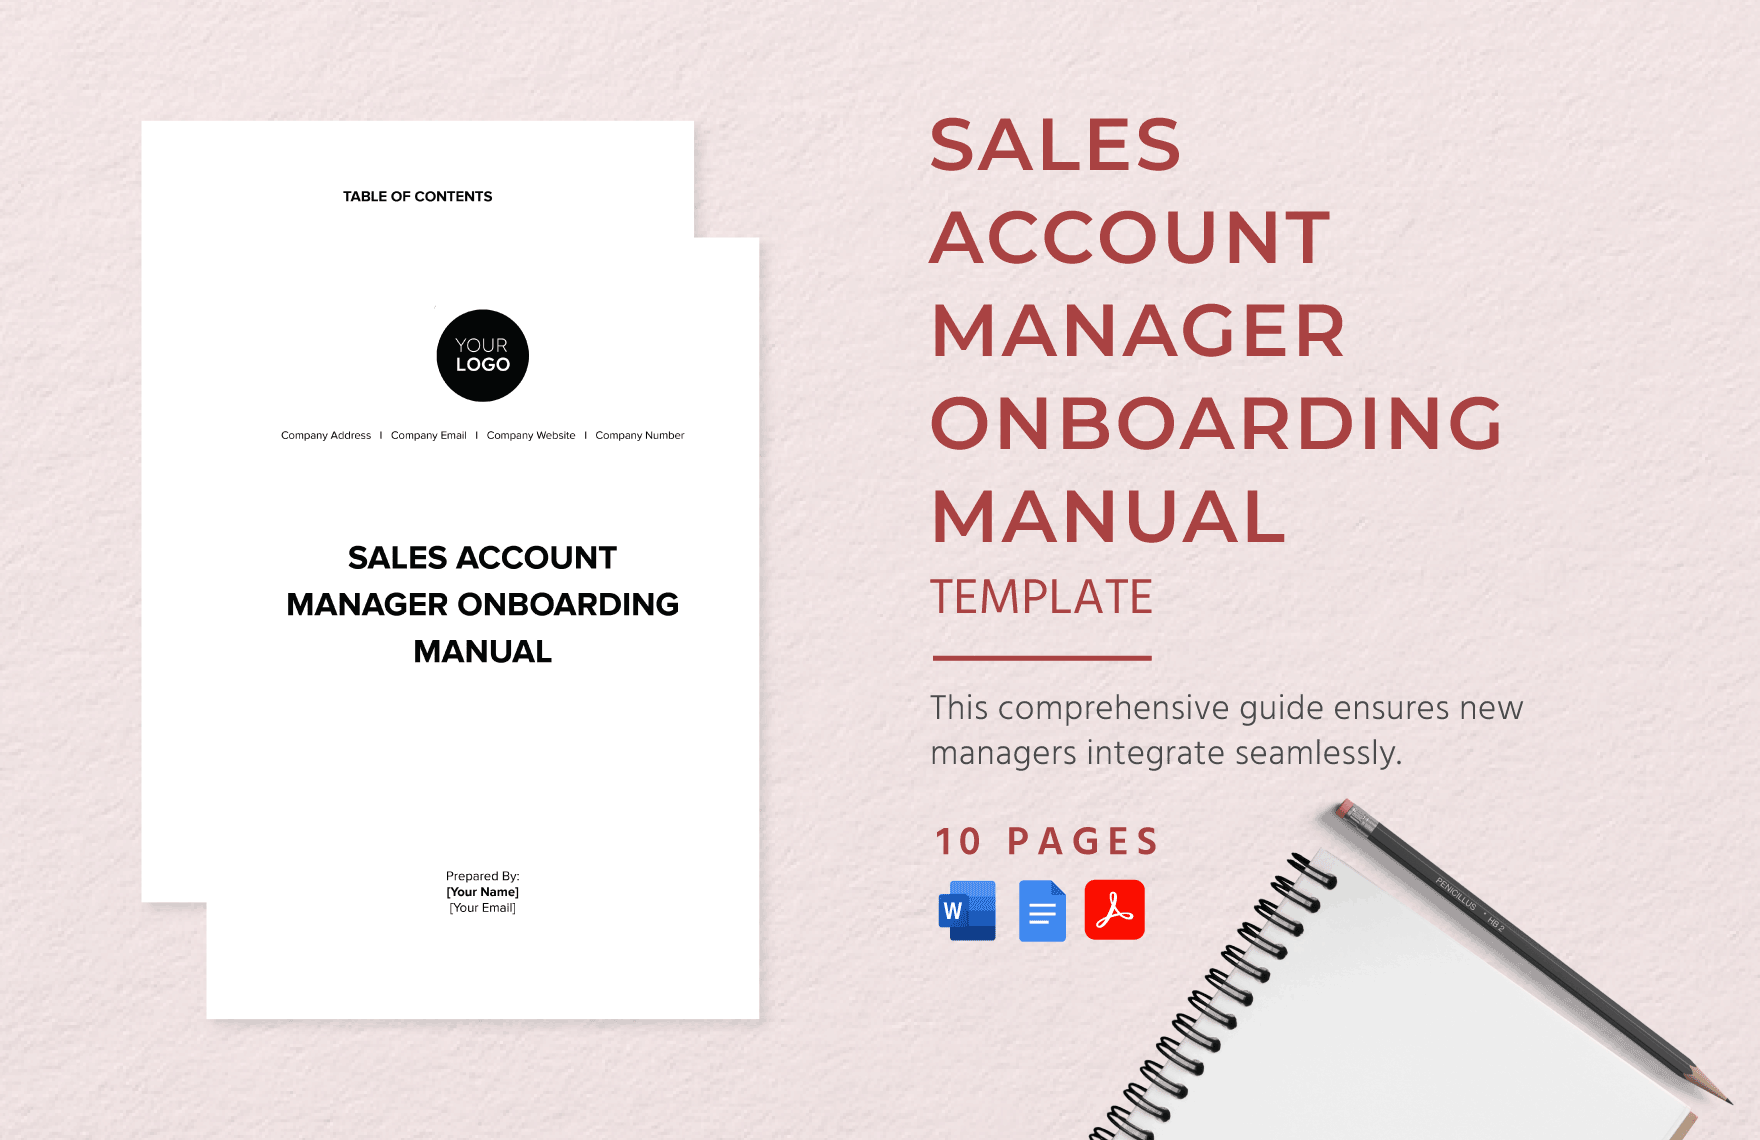 Sales Account Manager Onboarding Manual Template in Word, Google Docs, PDF